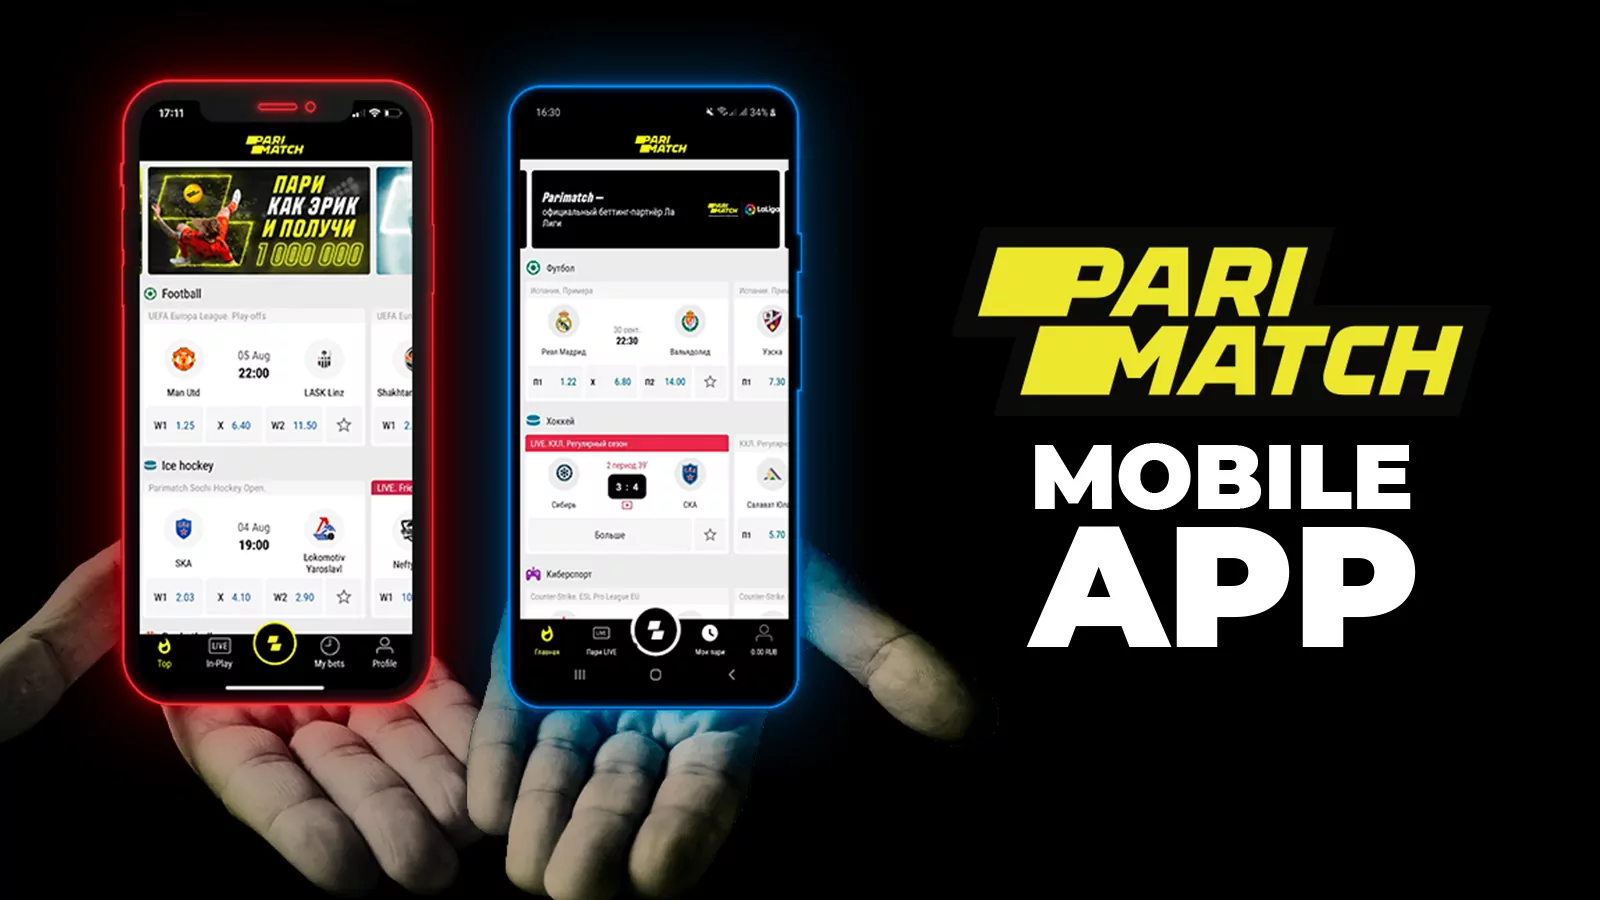 Parimatch app is well-known for its clear and user-friendly interface.